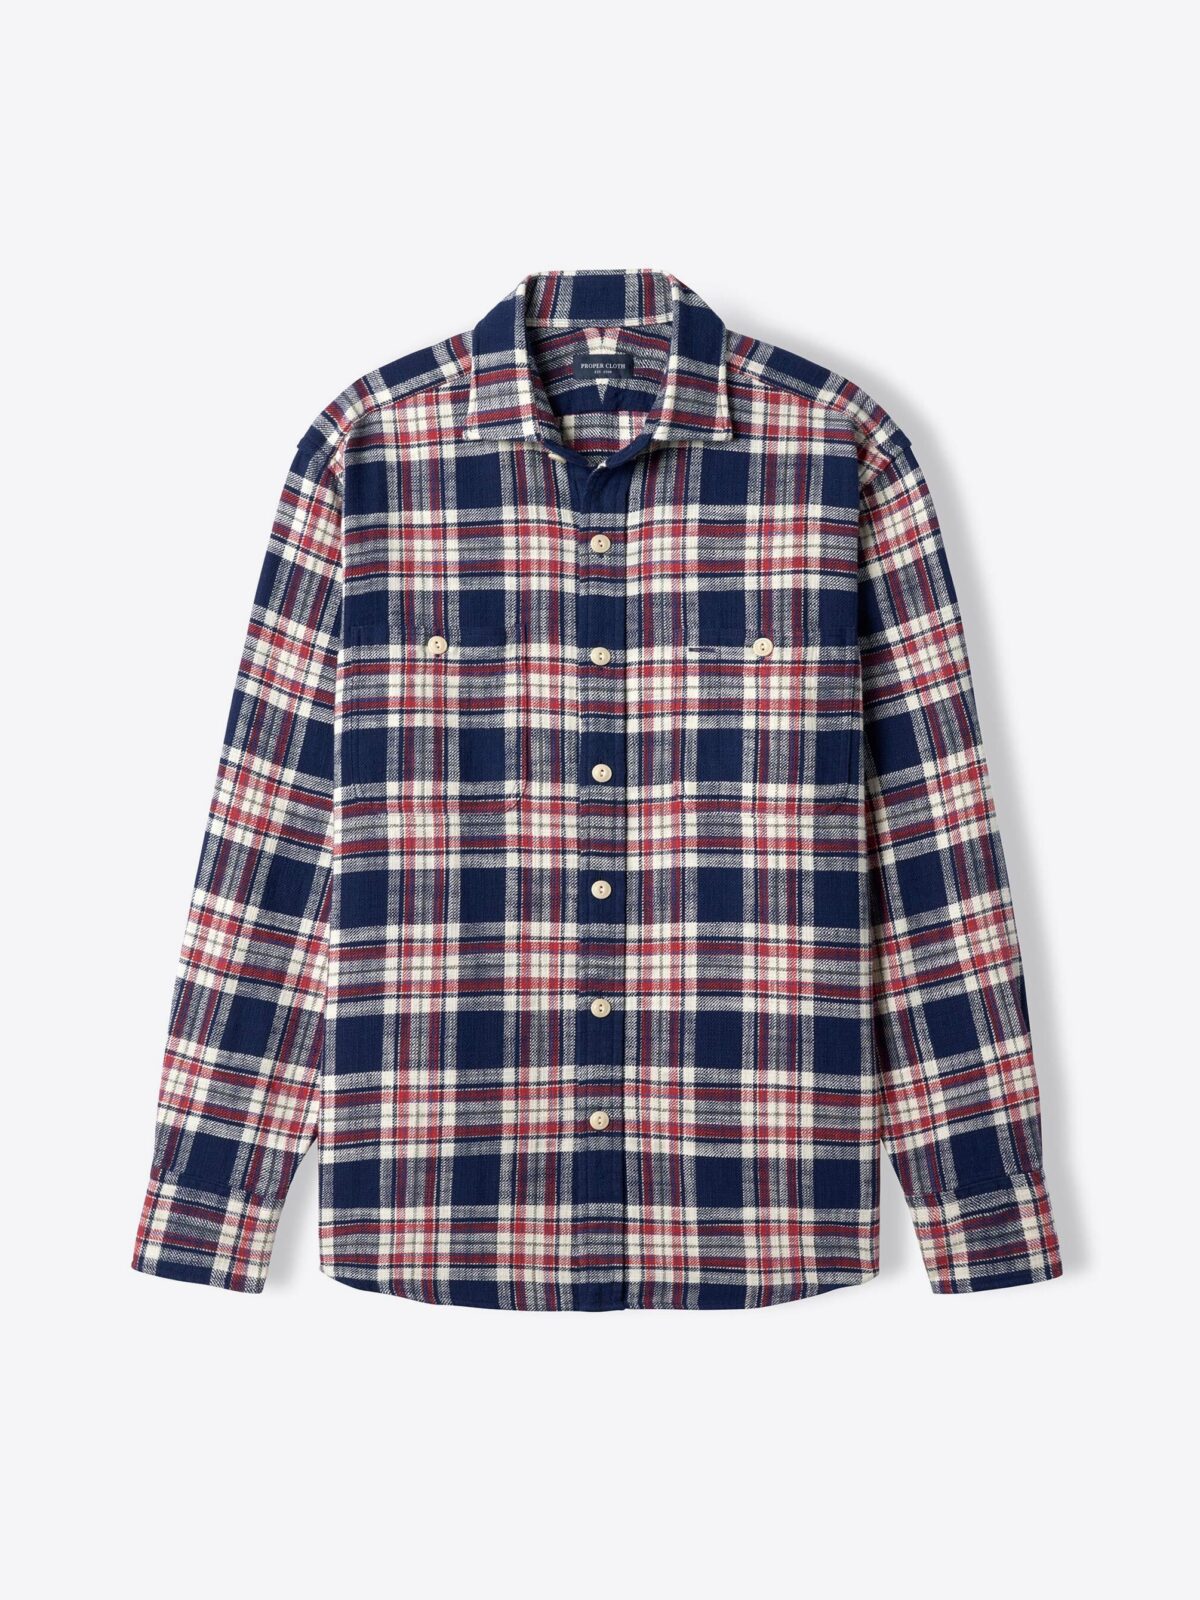 Jackson Washed Navy and Red Country Plaid Shirt by Proper Cloth